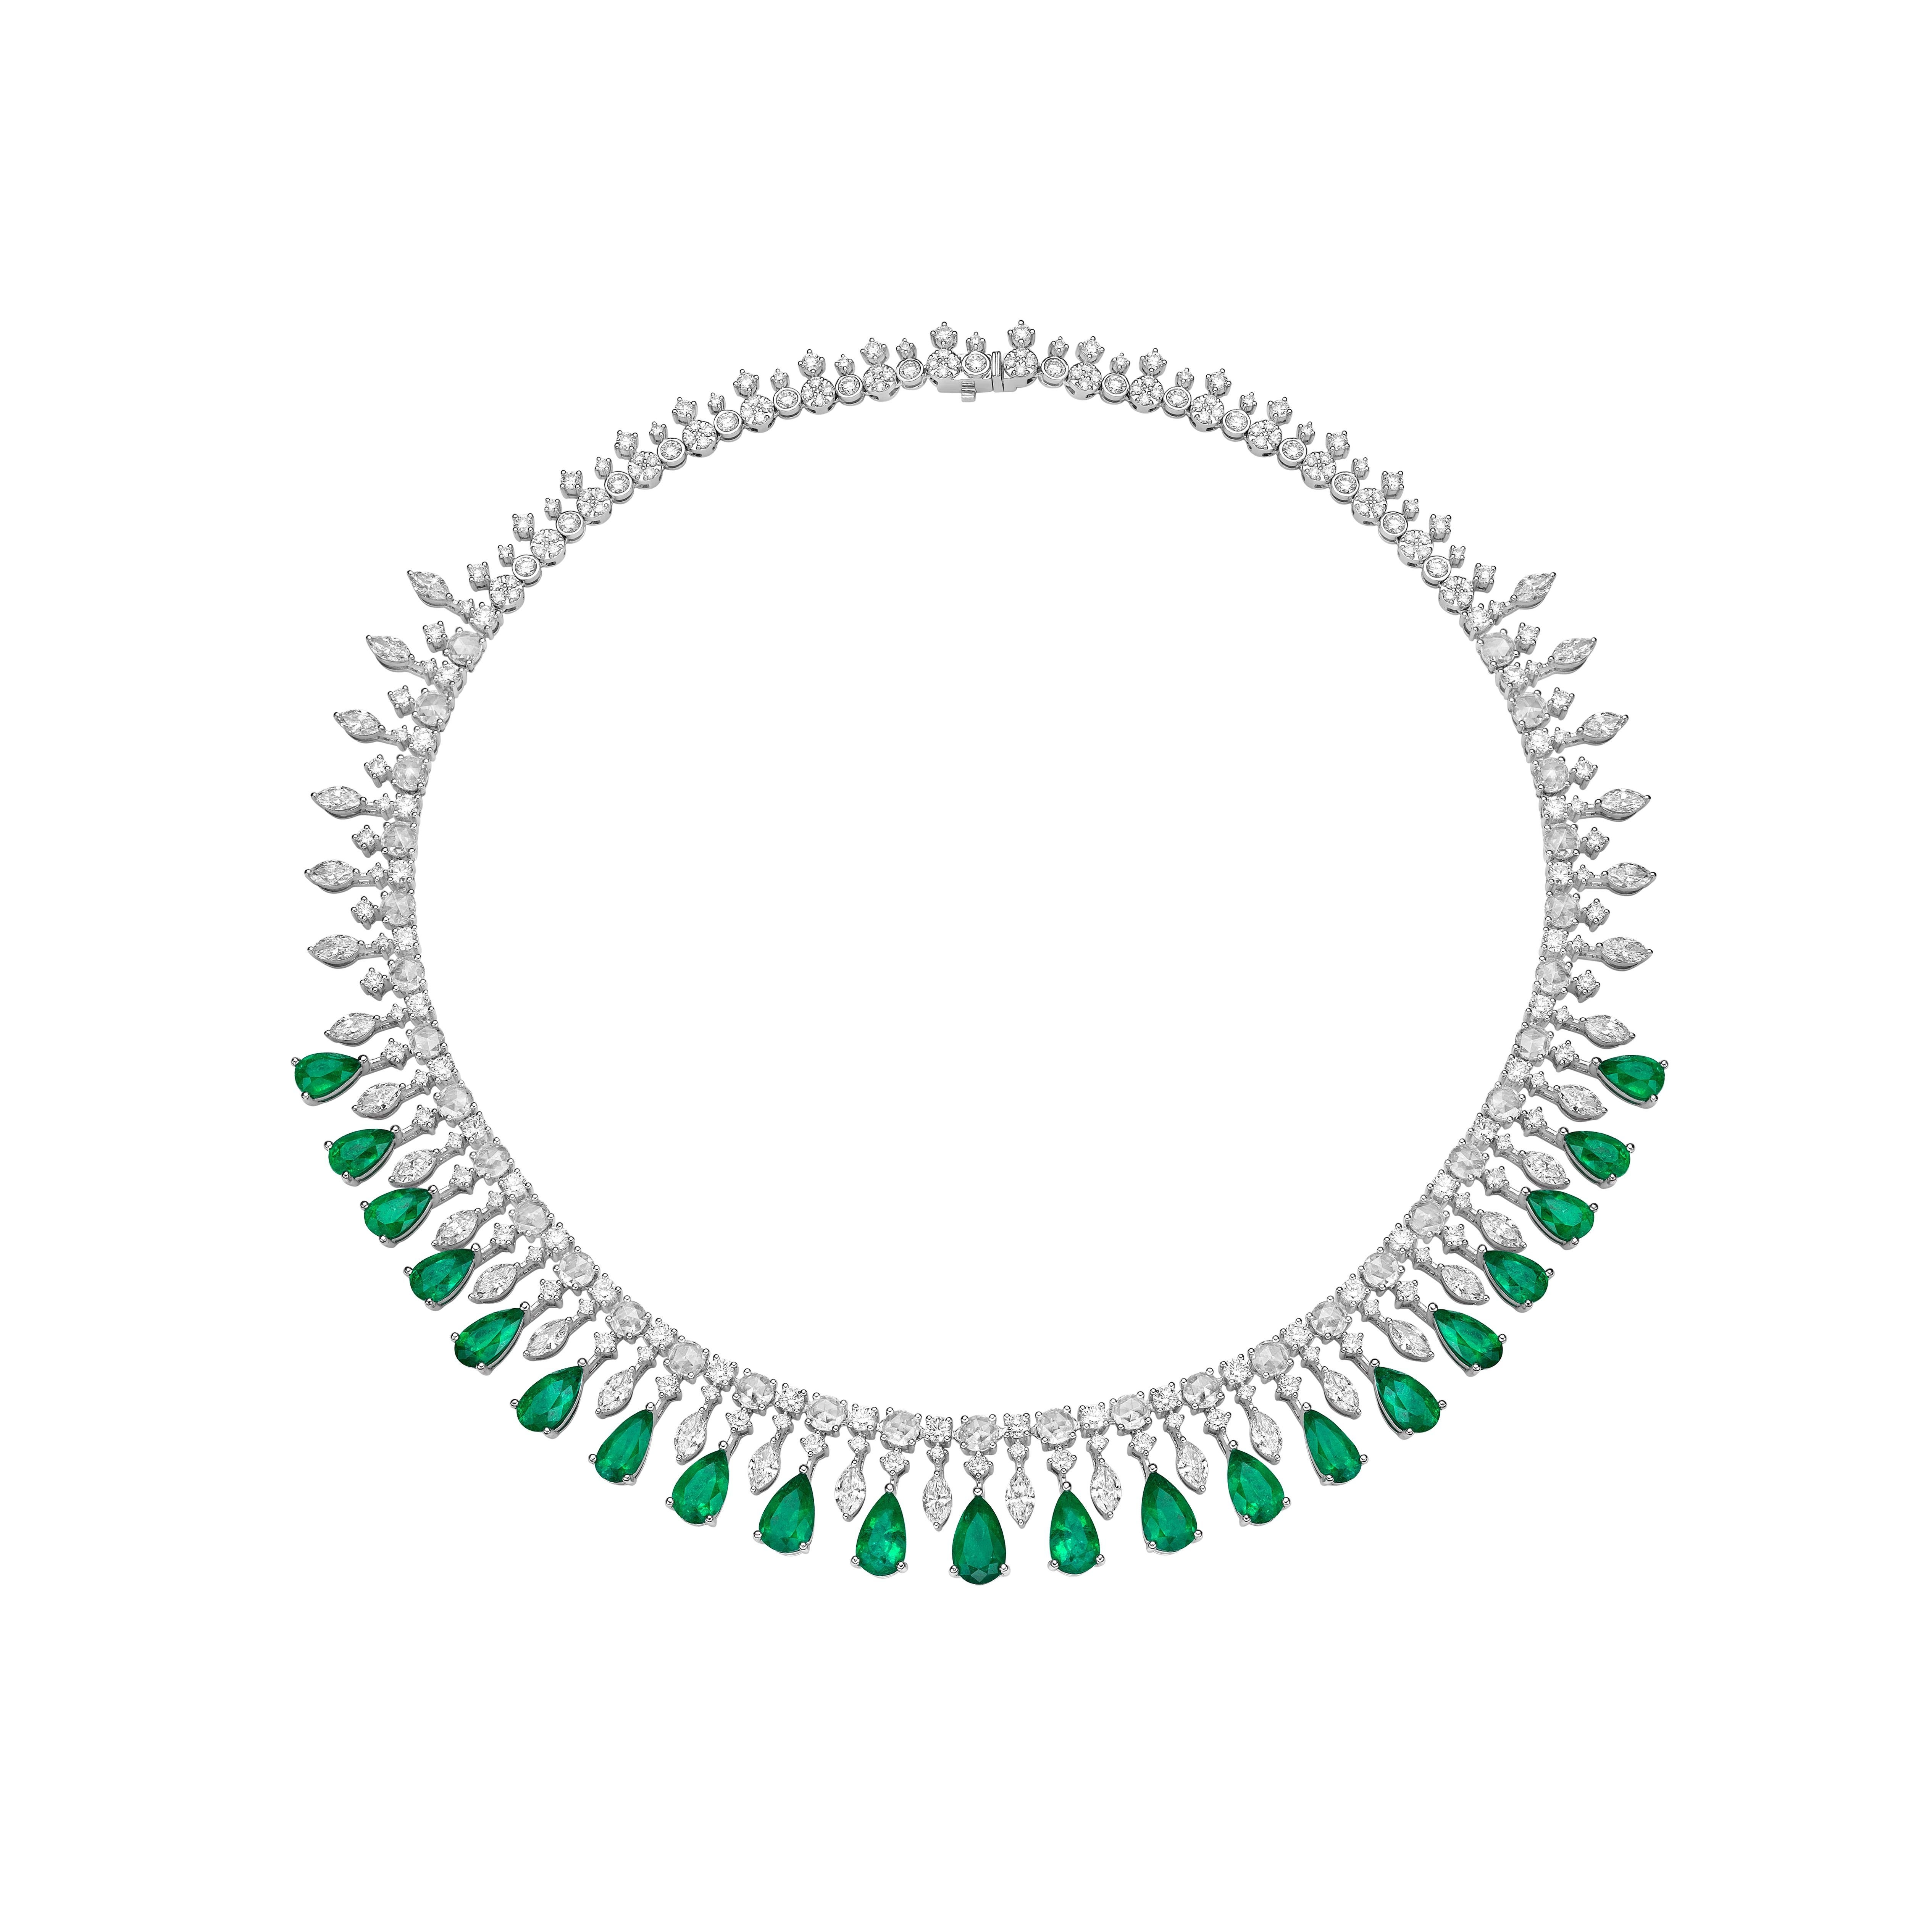 Contemporary 16.81 Carat Emerald Necklace in 18Karat White Gold with Diamond. For Sale